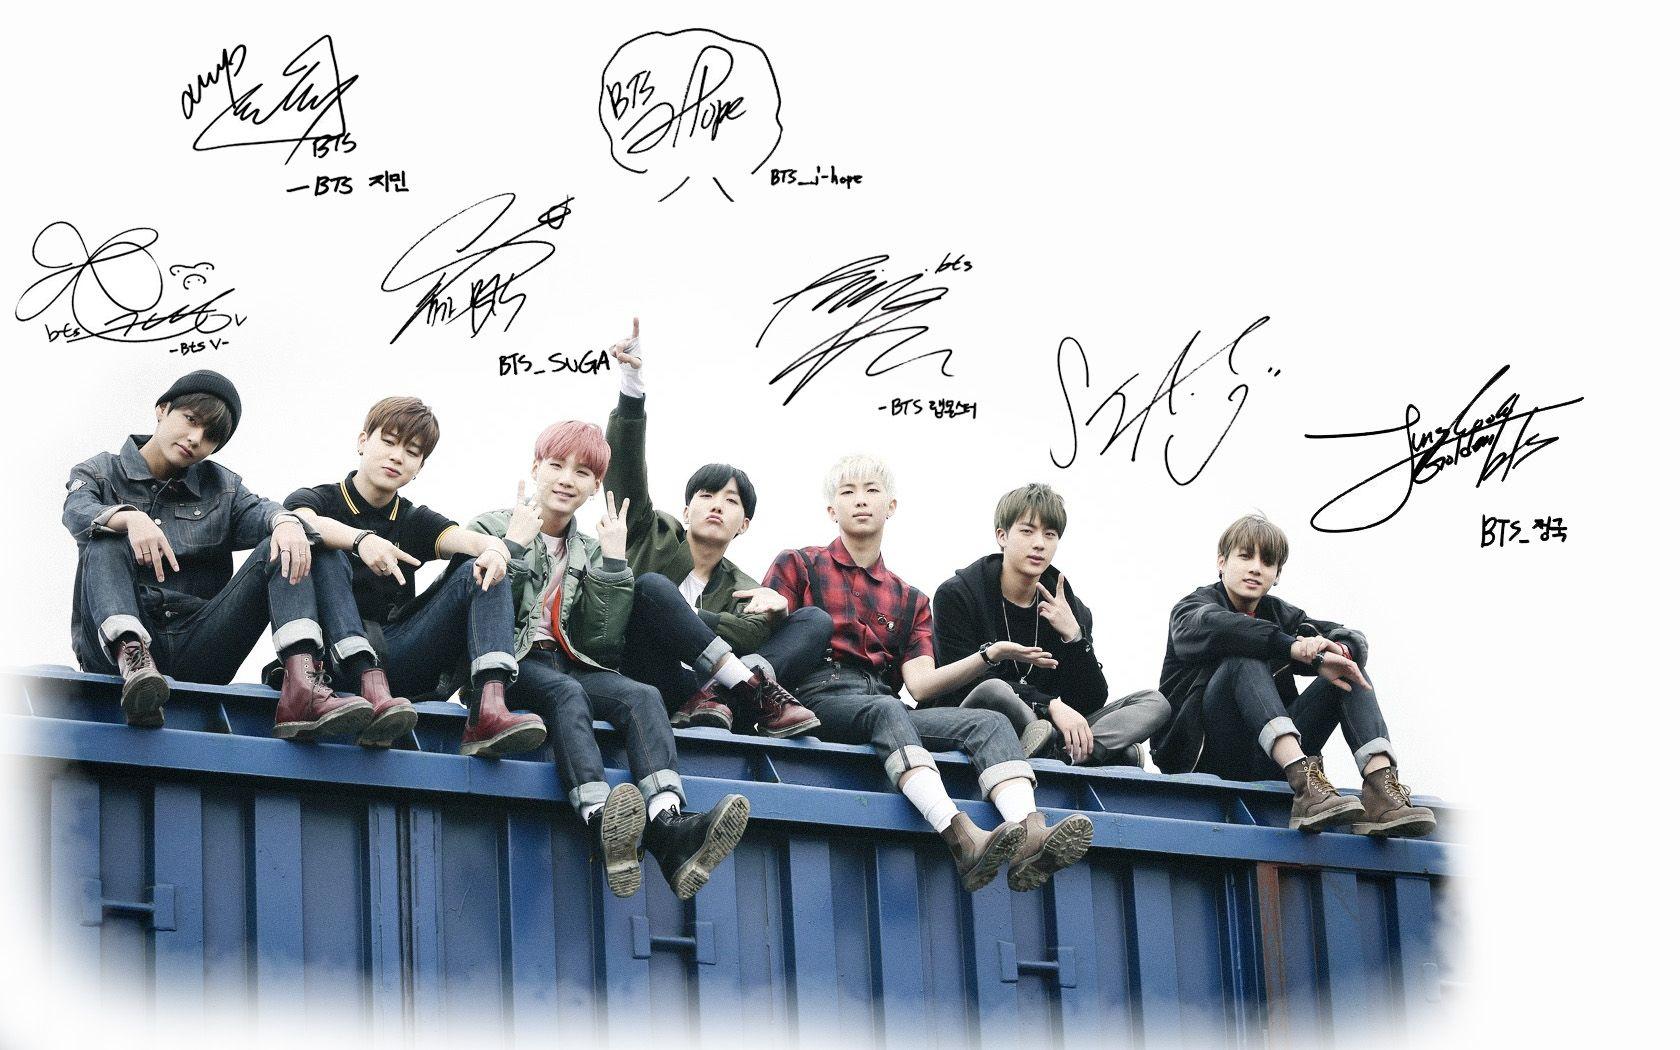 337 Bts Wallpaper With Names free Download - MyWeb